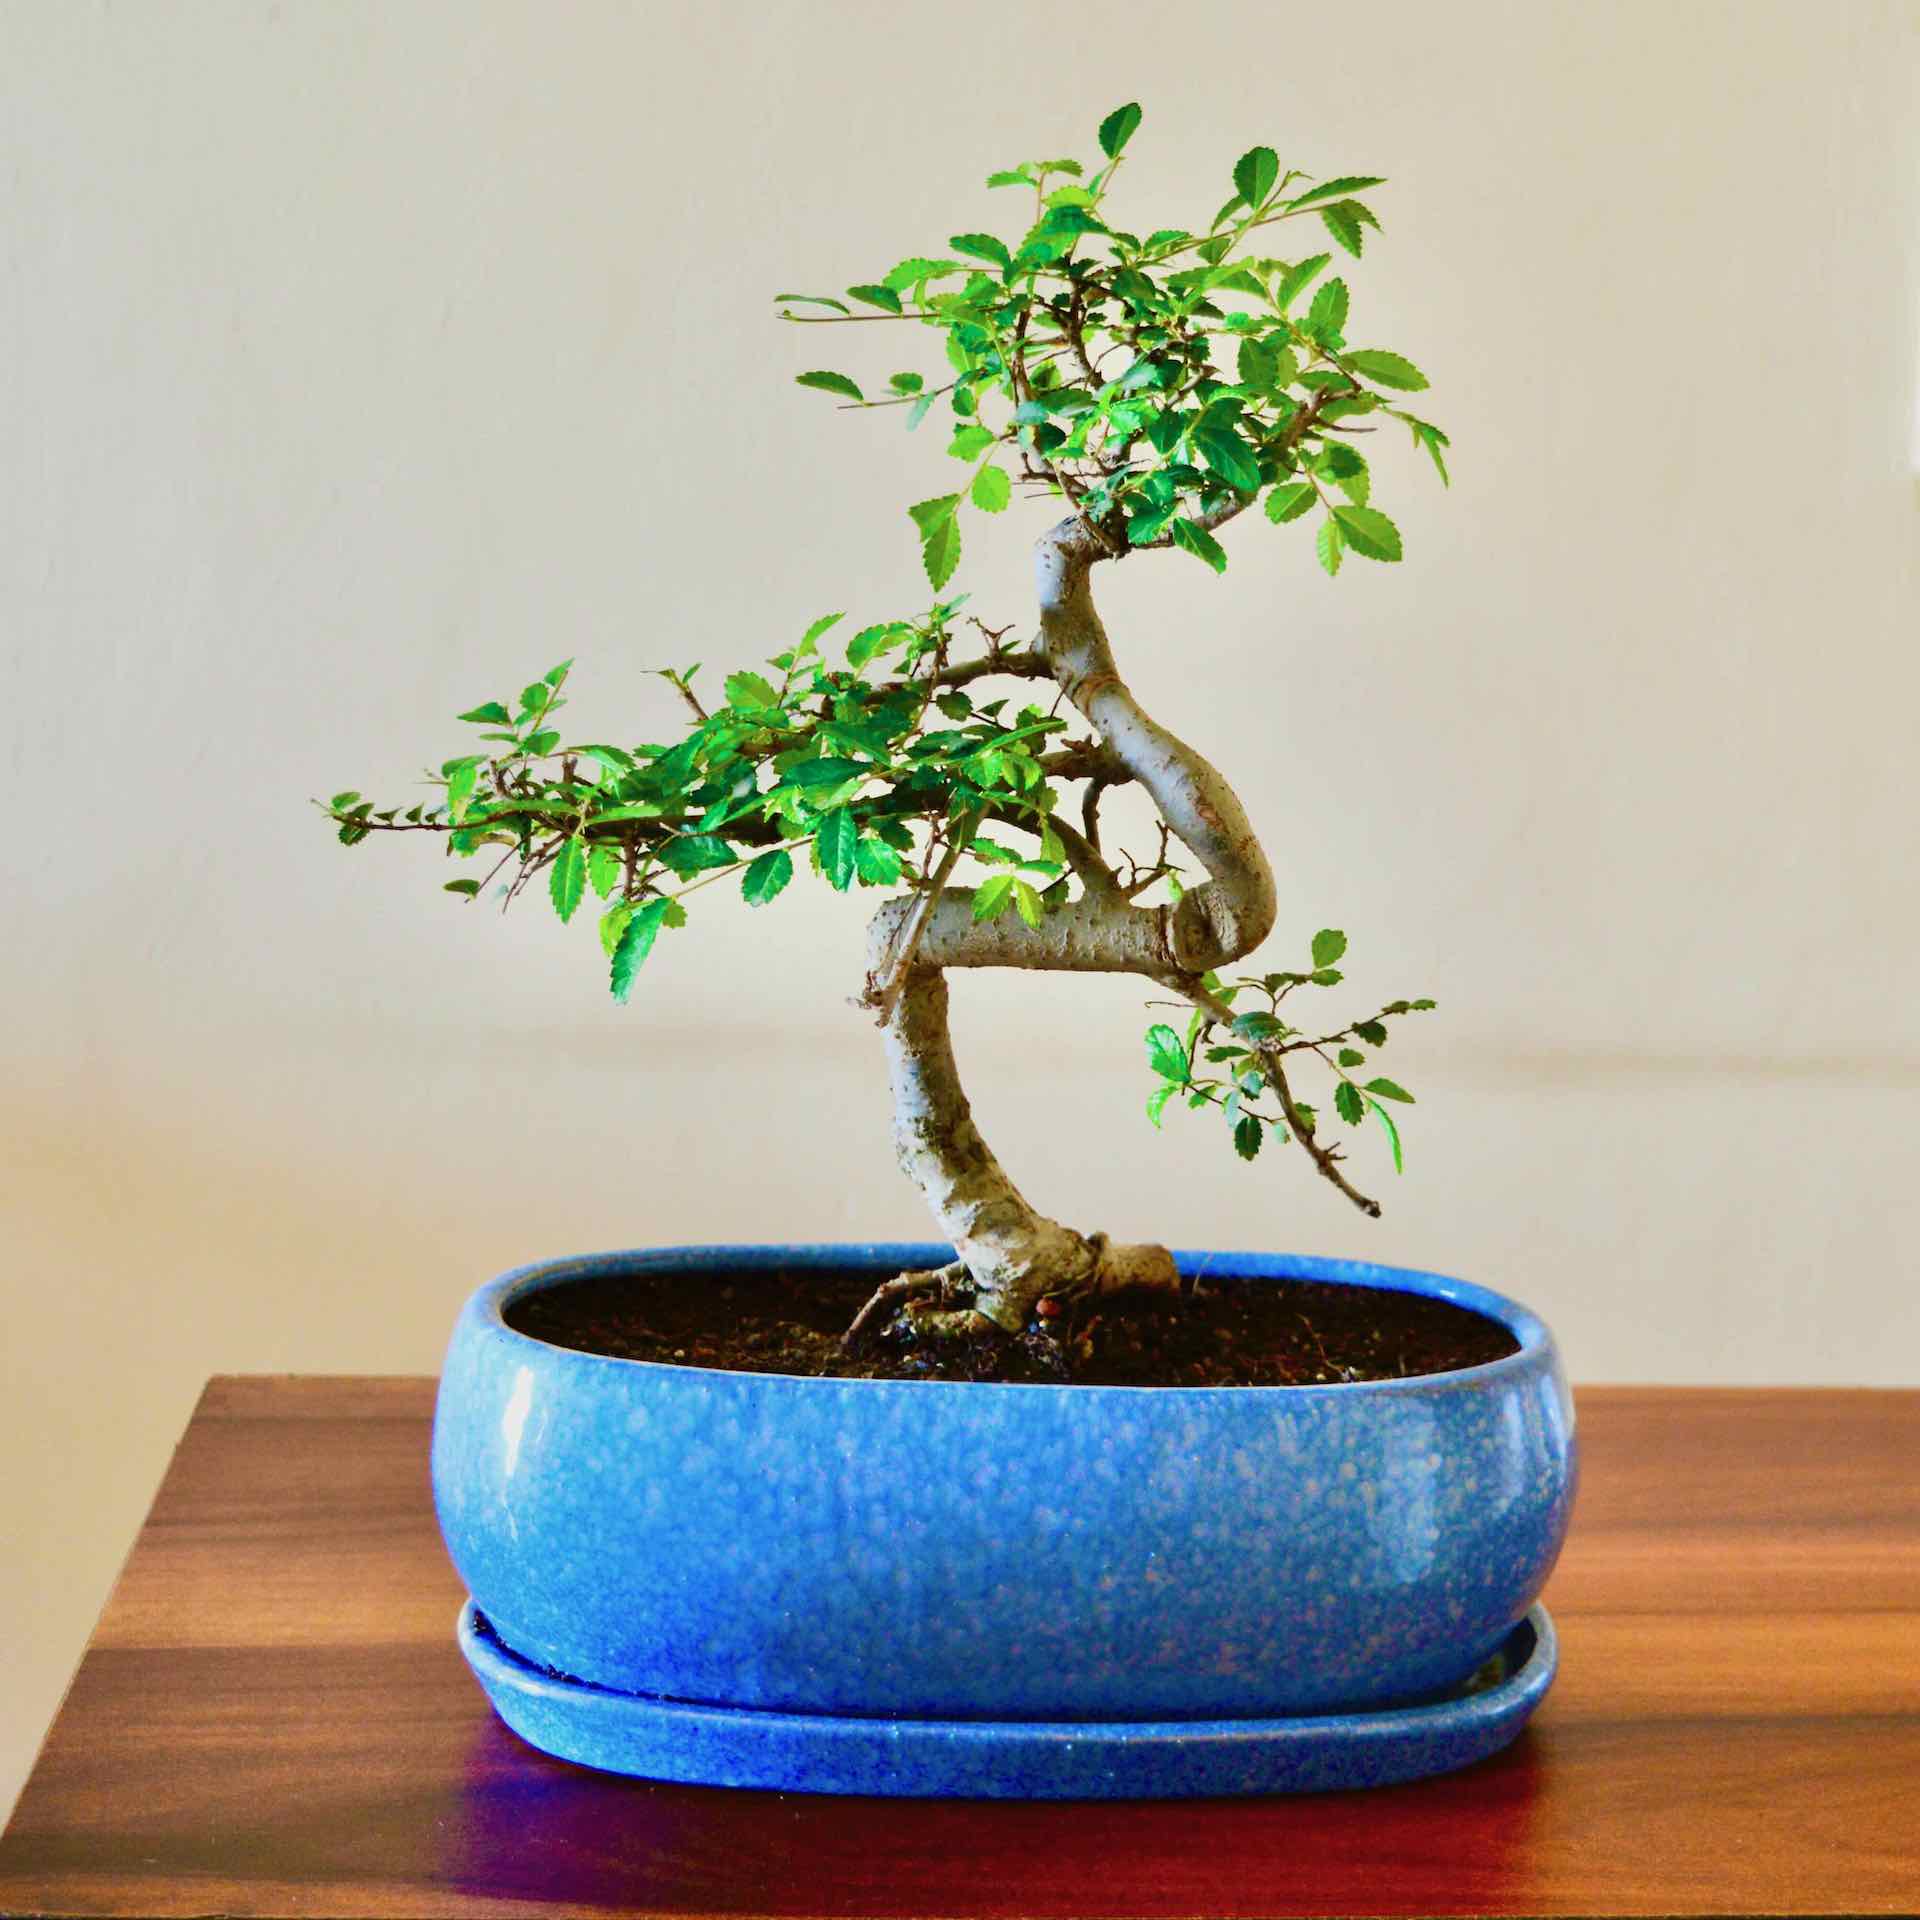 Abana Homes Ulmus Bonsai Plants Real for Home with Pot, 9 Yrs Old :  : Garden & Outdoors